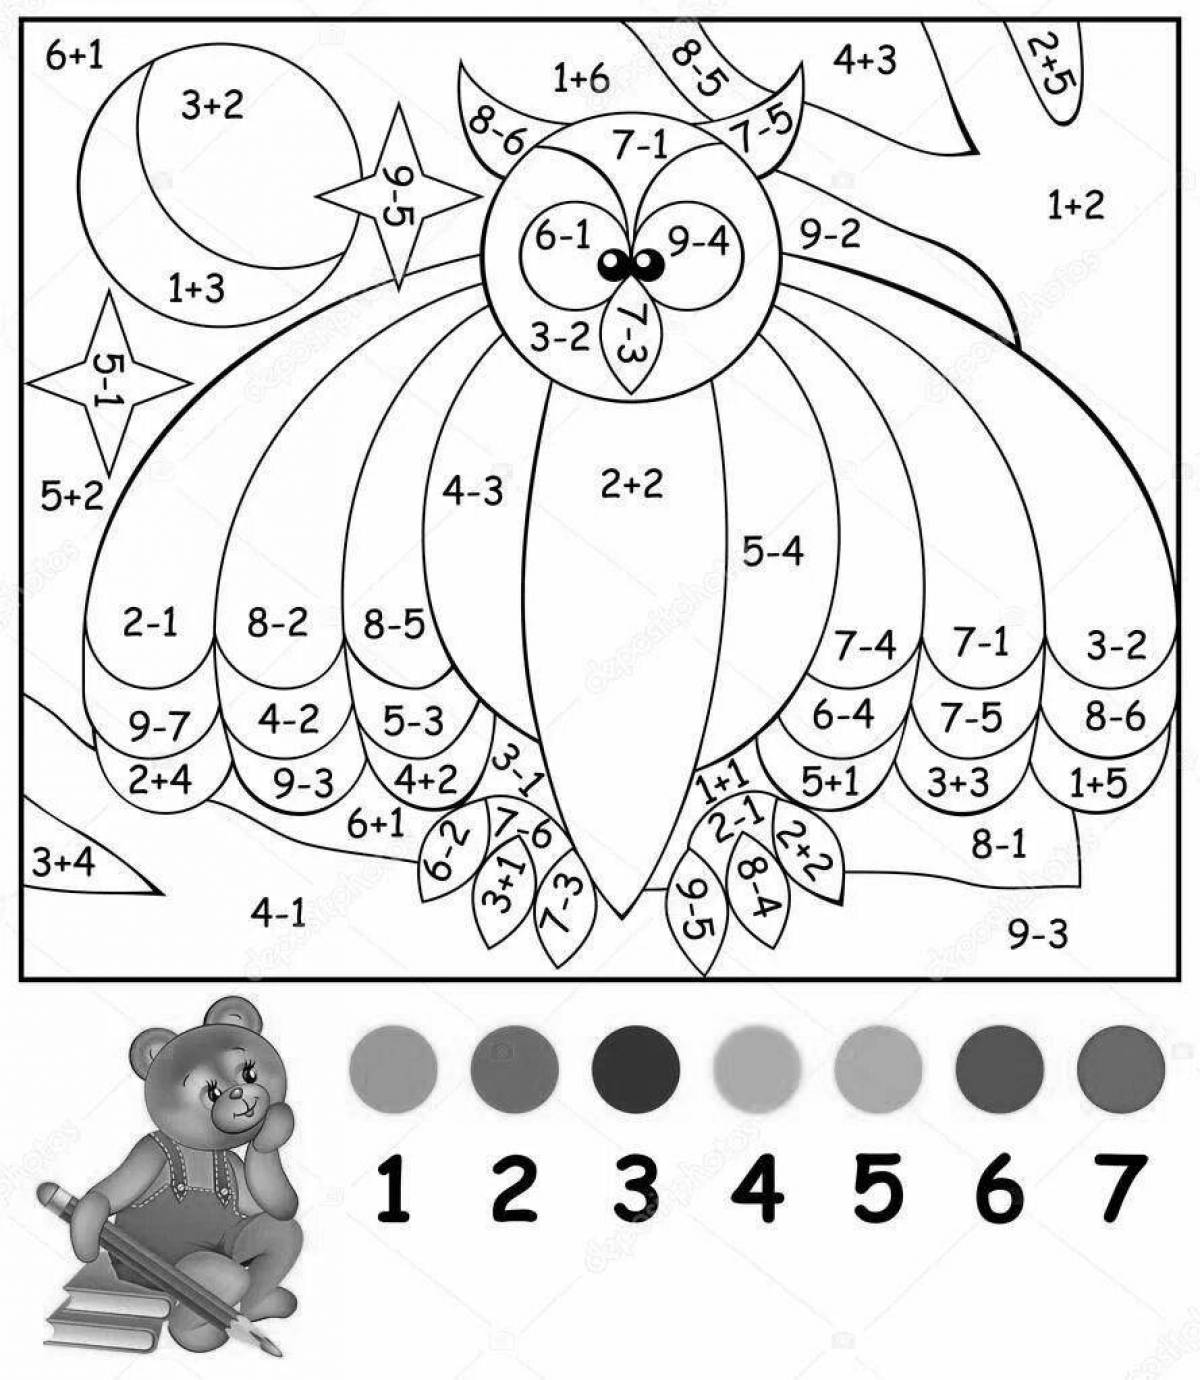 Interactive coloring by numbers for children 6-7 years old